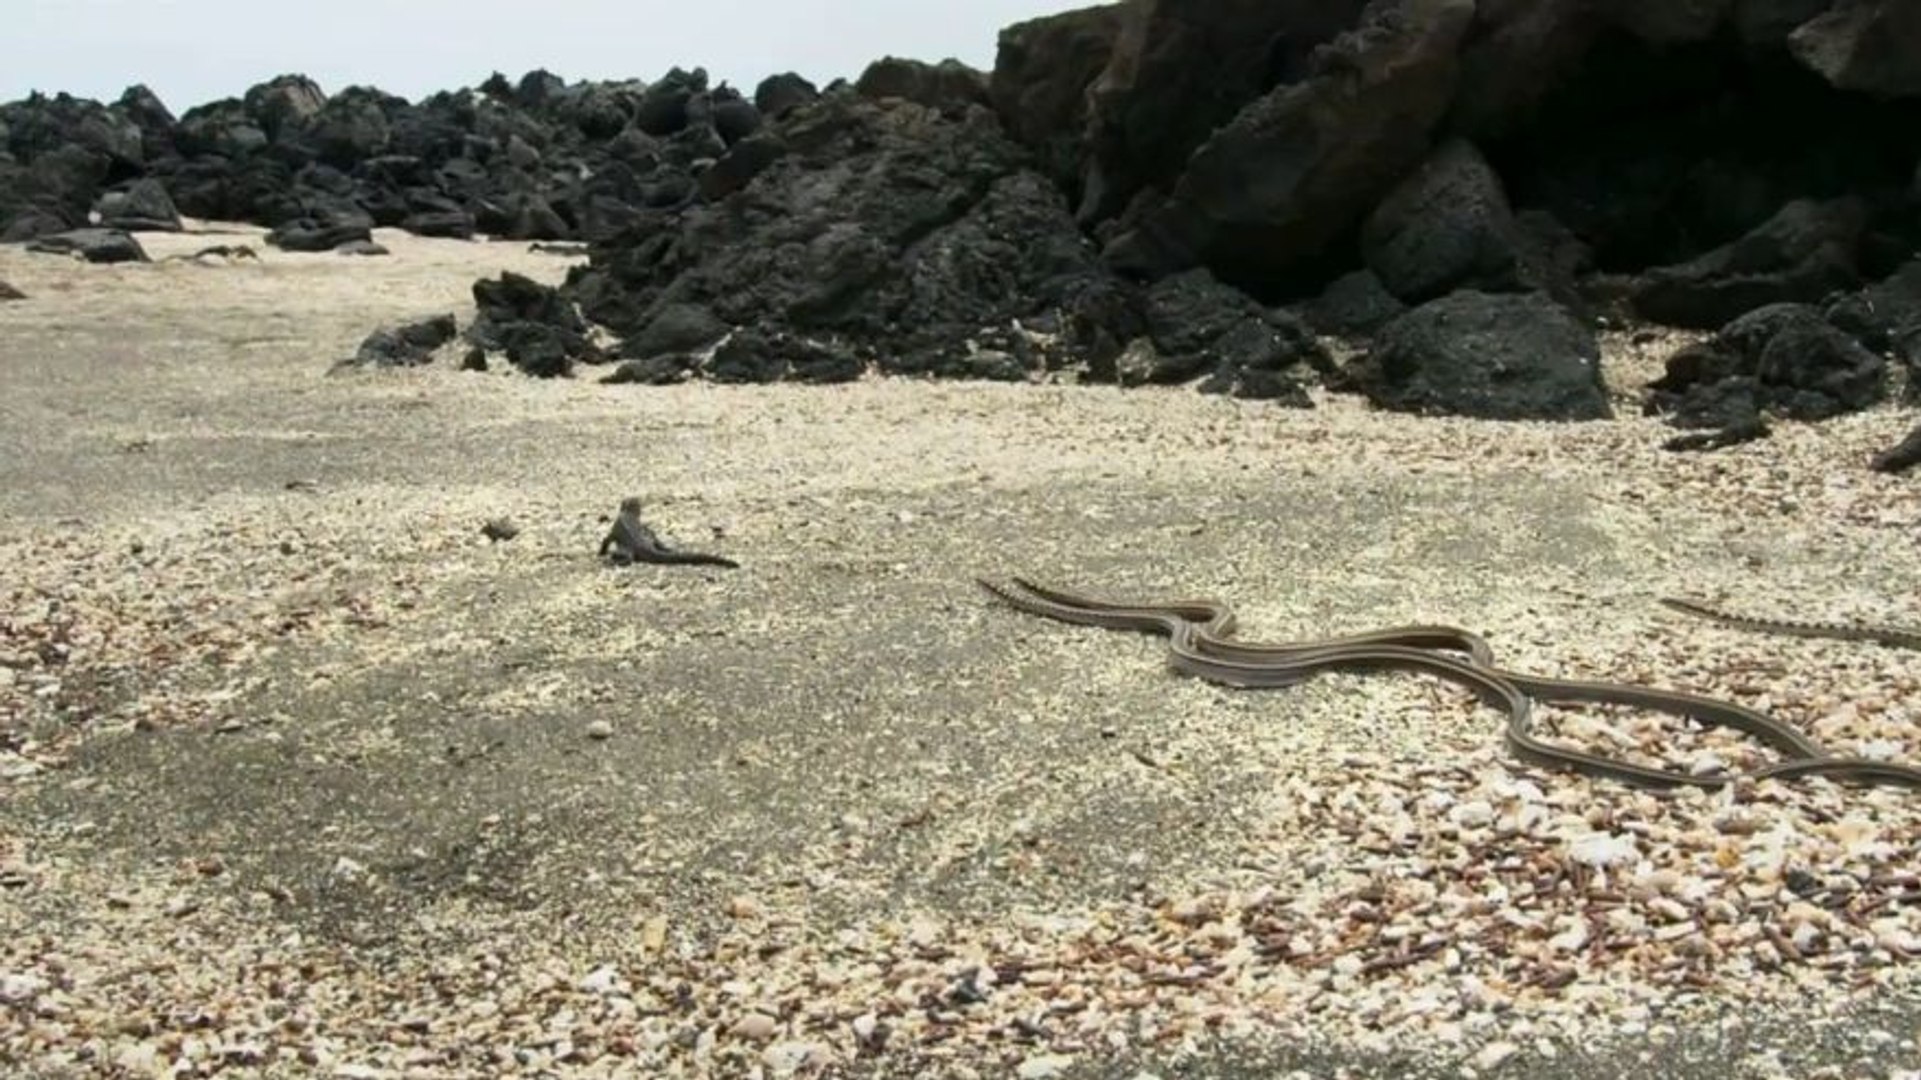 Baby Iguana being chased by snakes (FULL) - Vidéo Dailymotion